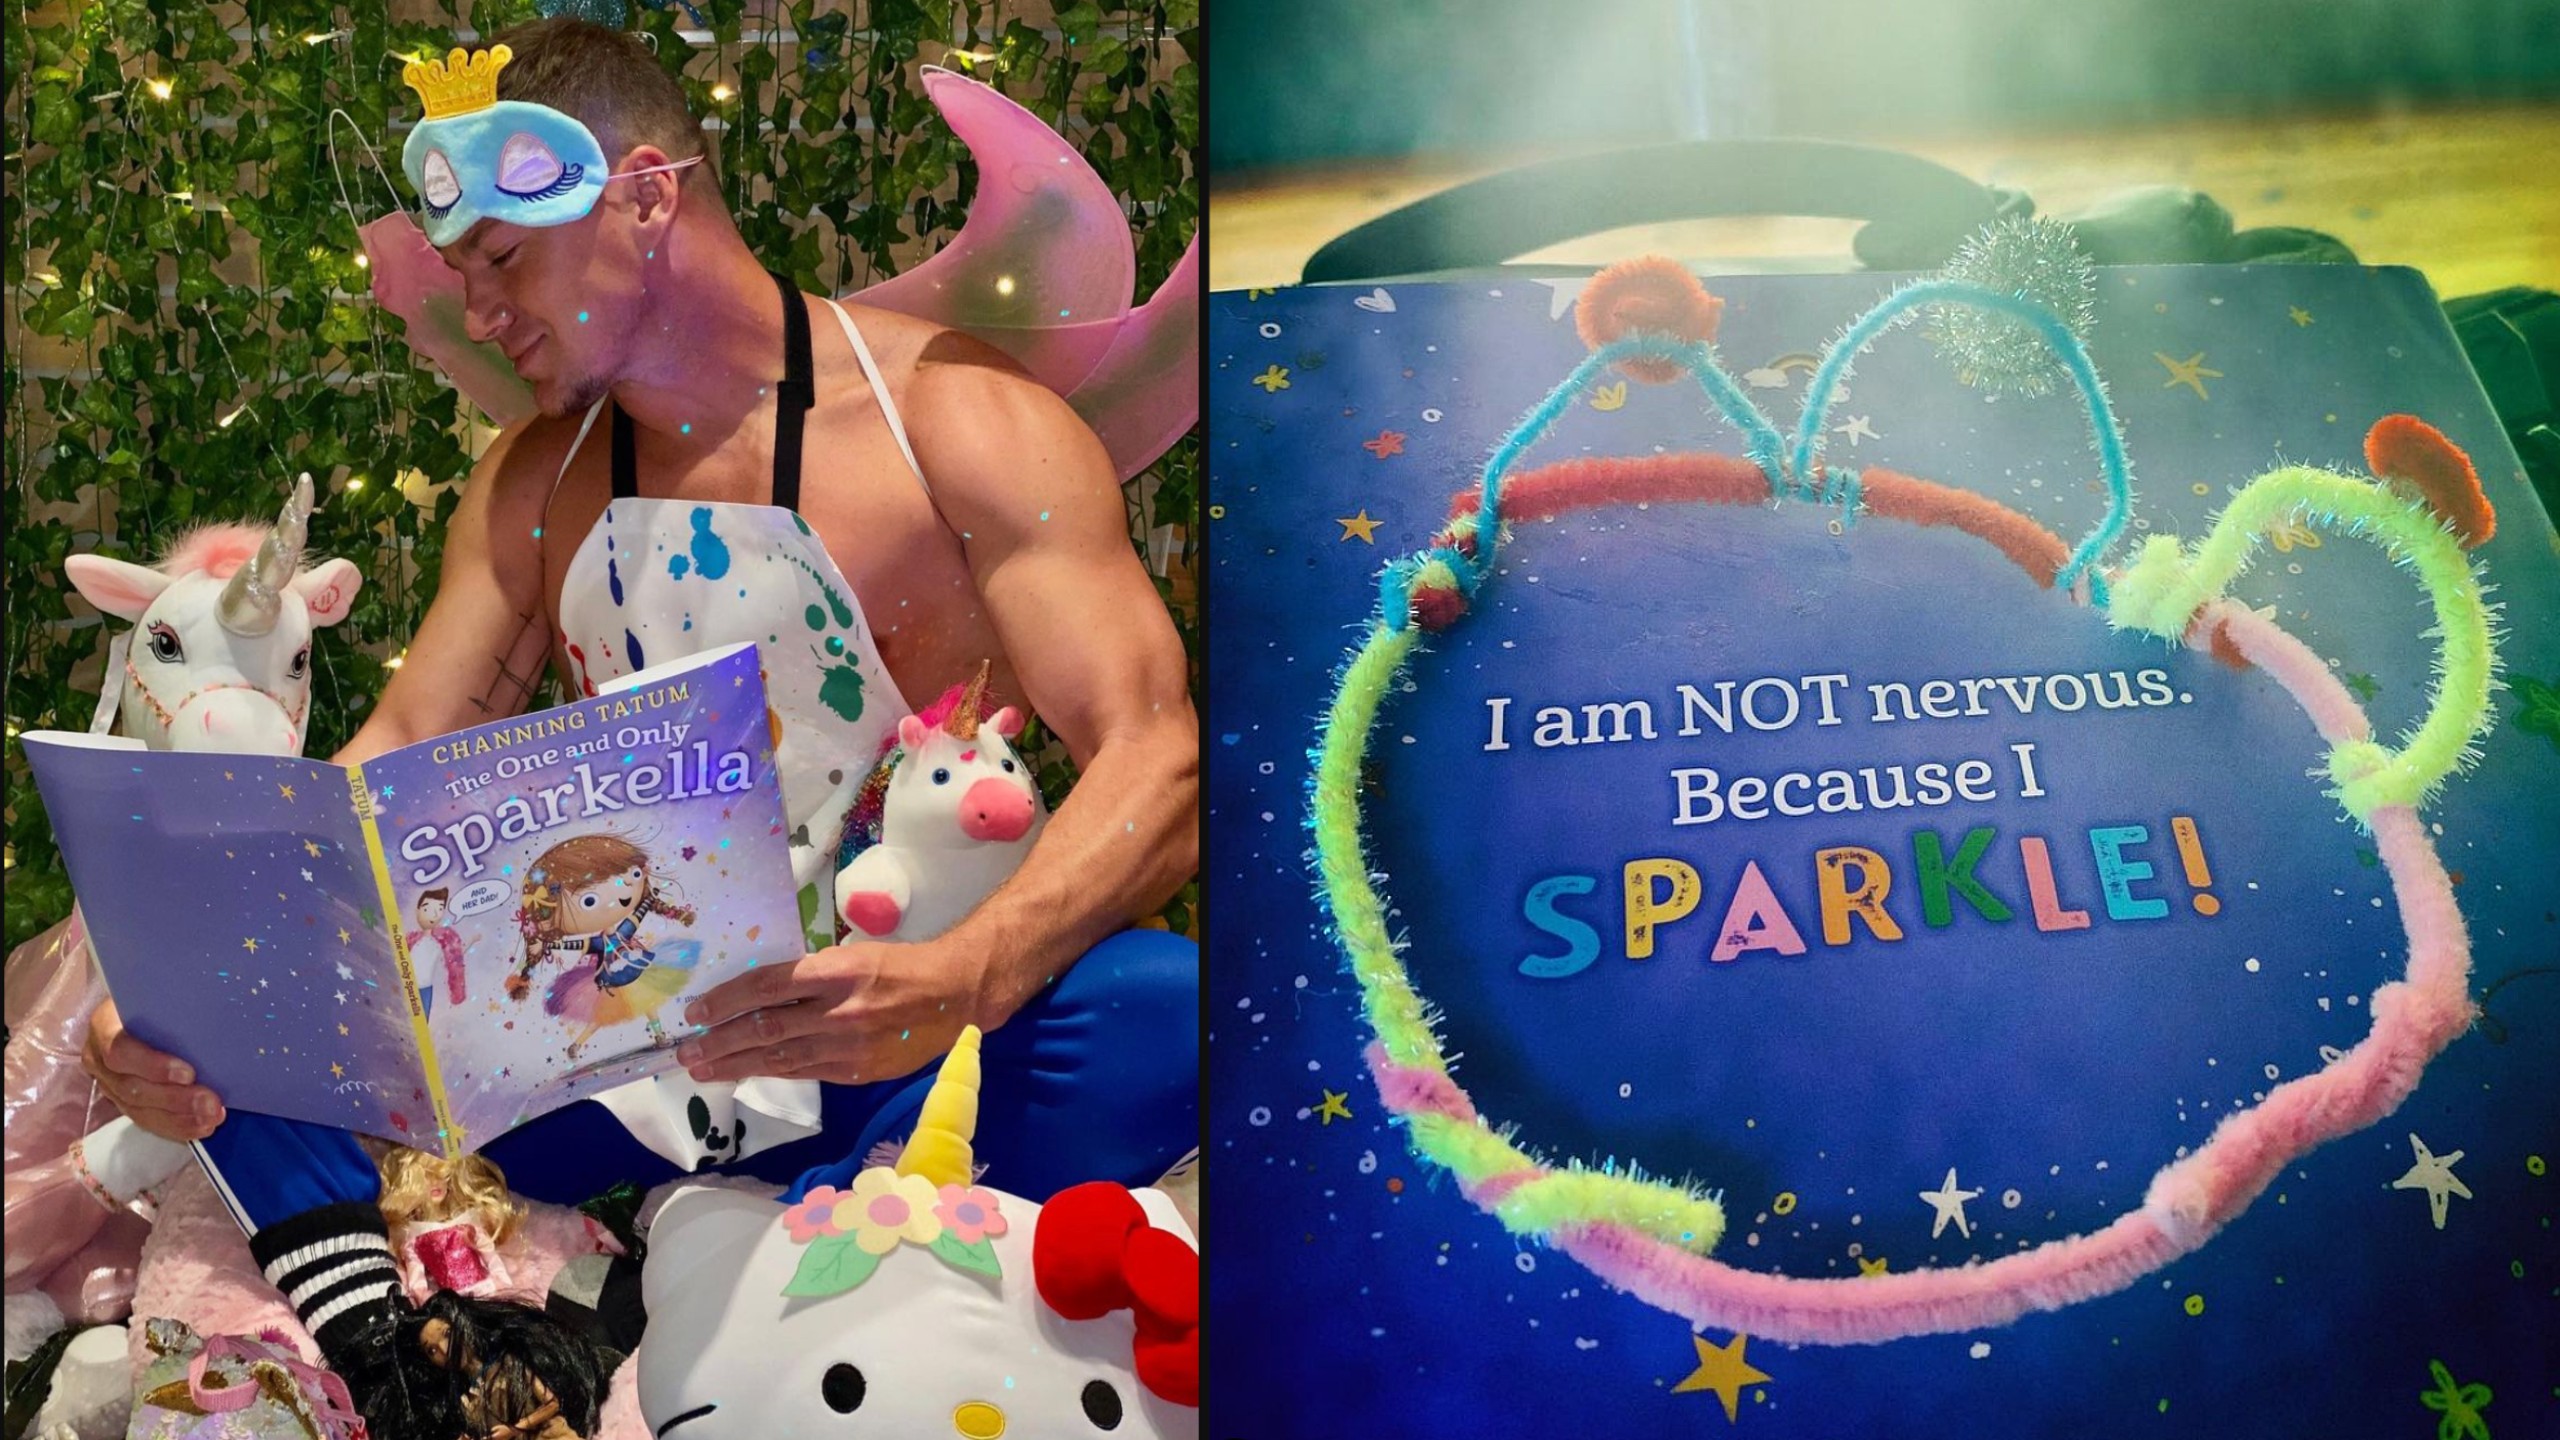 Channing Tatum empowers kids in new children's book based on daughter